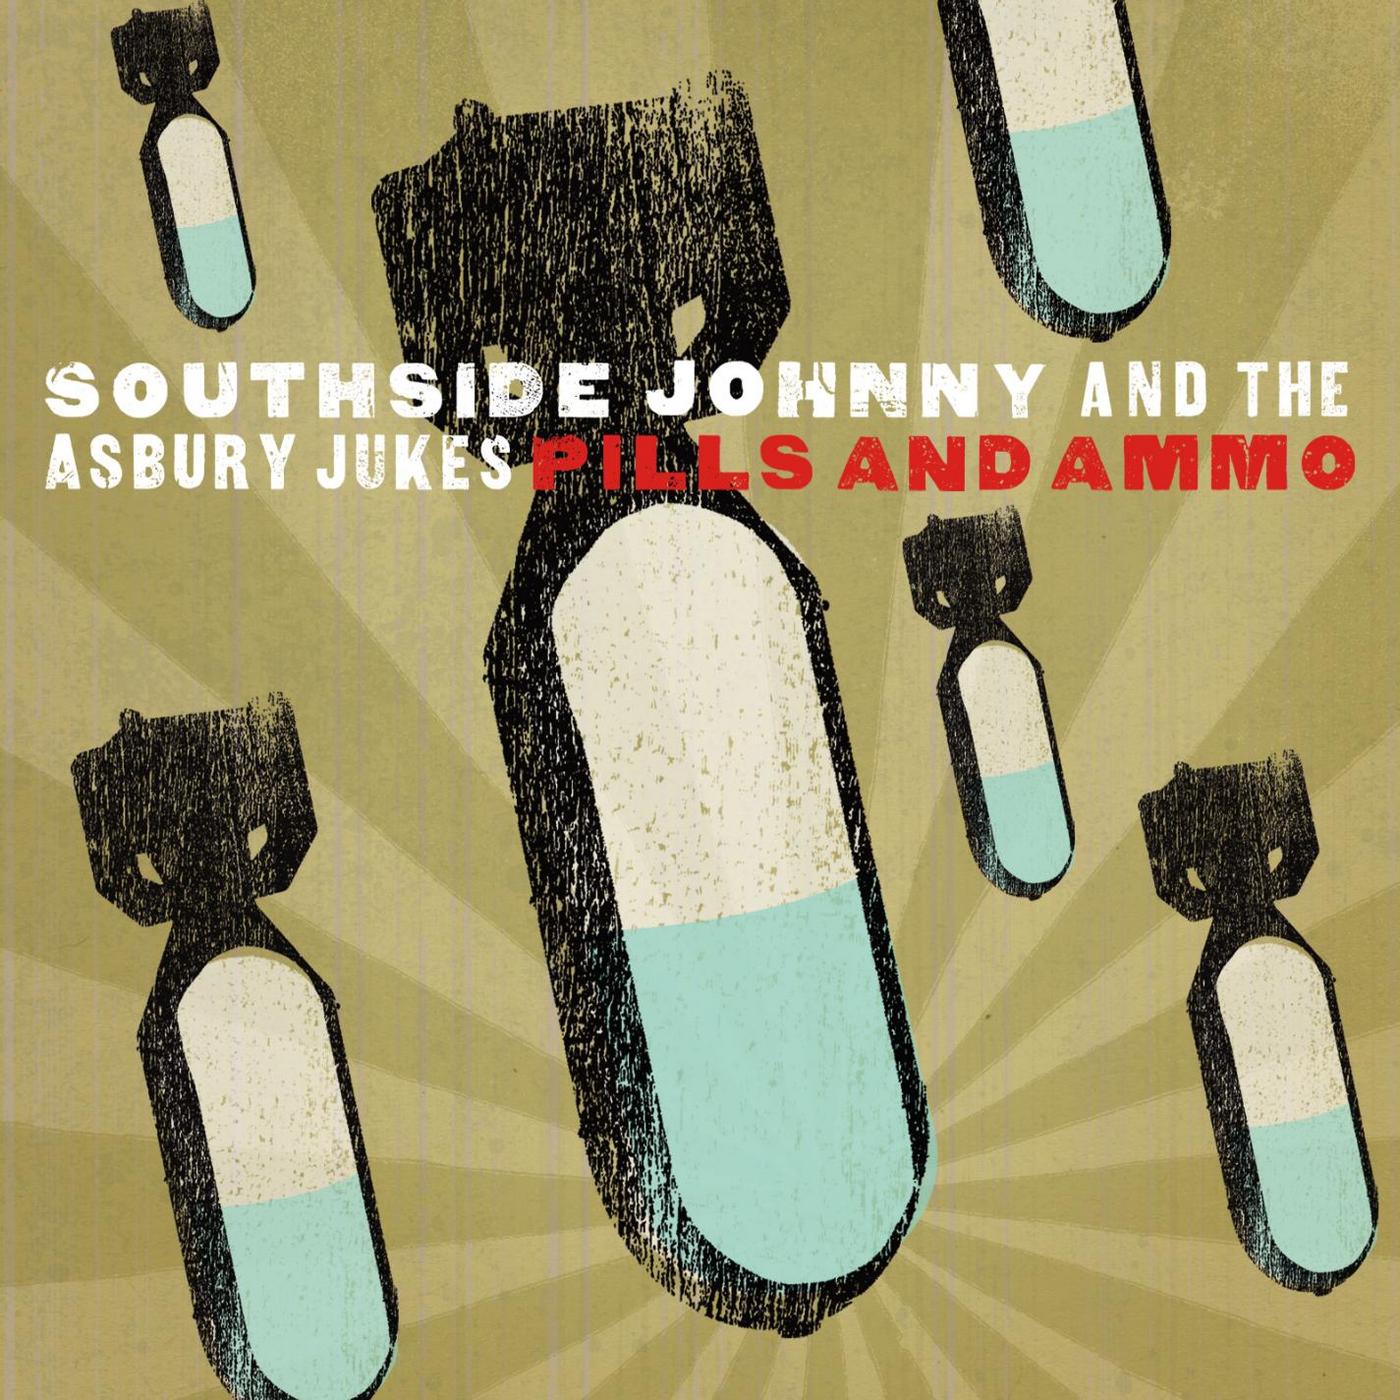 Pile Poil j'écoute ça - Page 18 Southside+Johnny+&+The+Asbury+Jukes+-+Pills+And+Ammo+-+Front